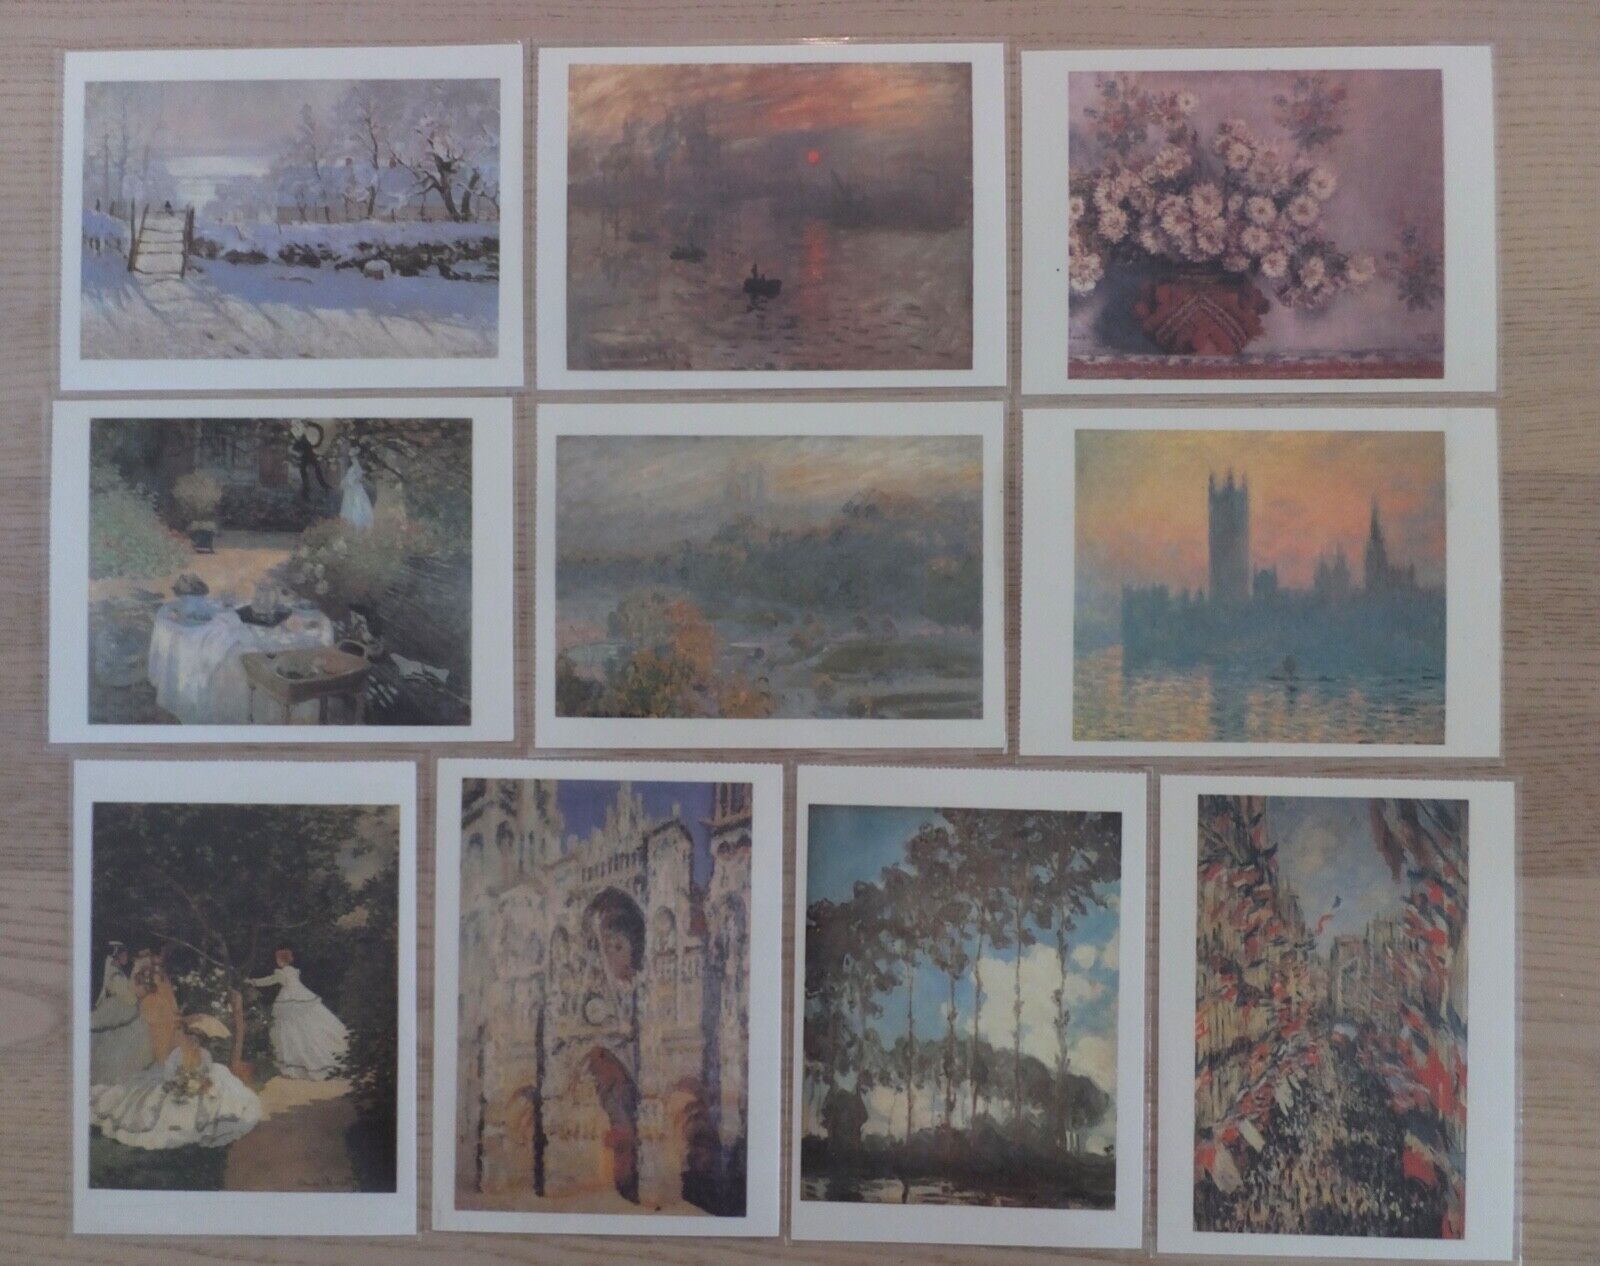 Laminated set of 30 Monet Postcards, Reproductions